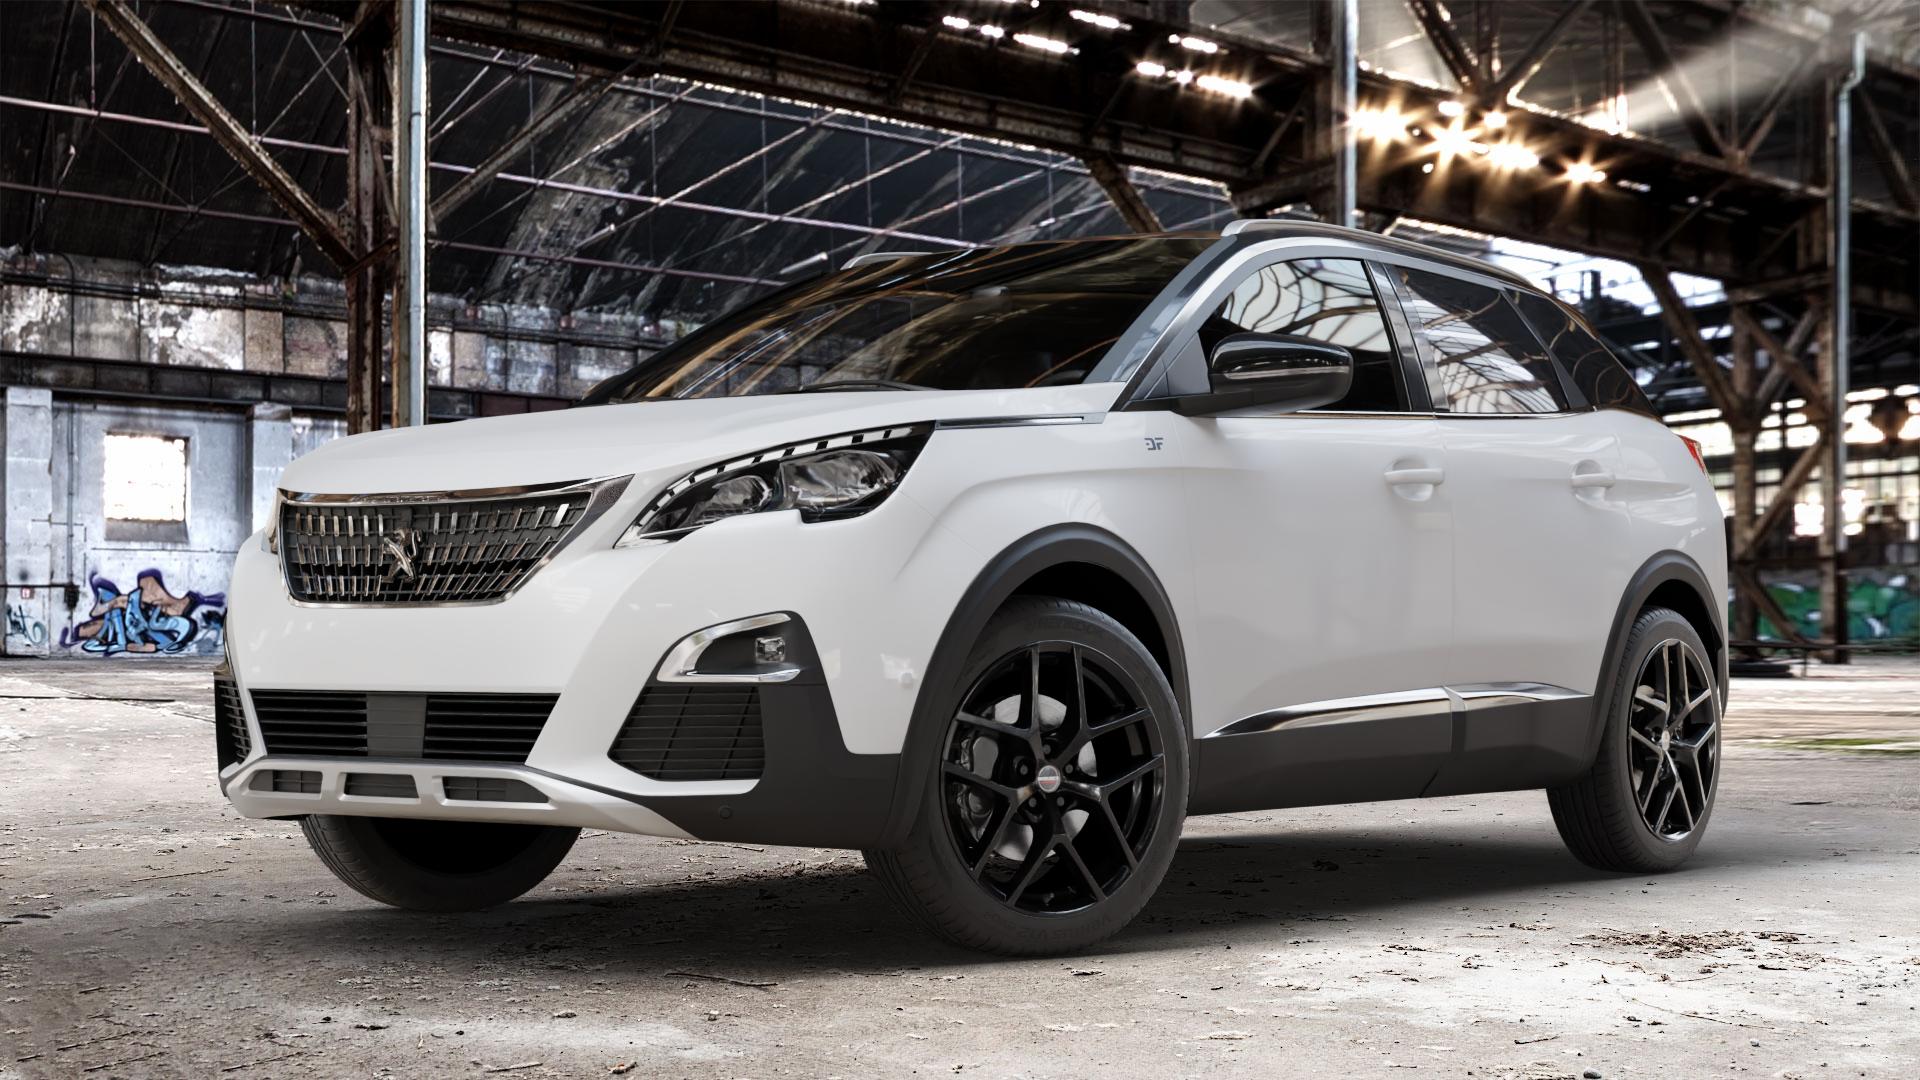 Peugeot 3008 II Type M 2,0l HDi 130kW (177 hp) Wheels and Tyre Packages